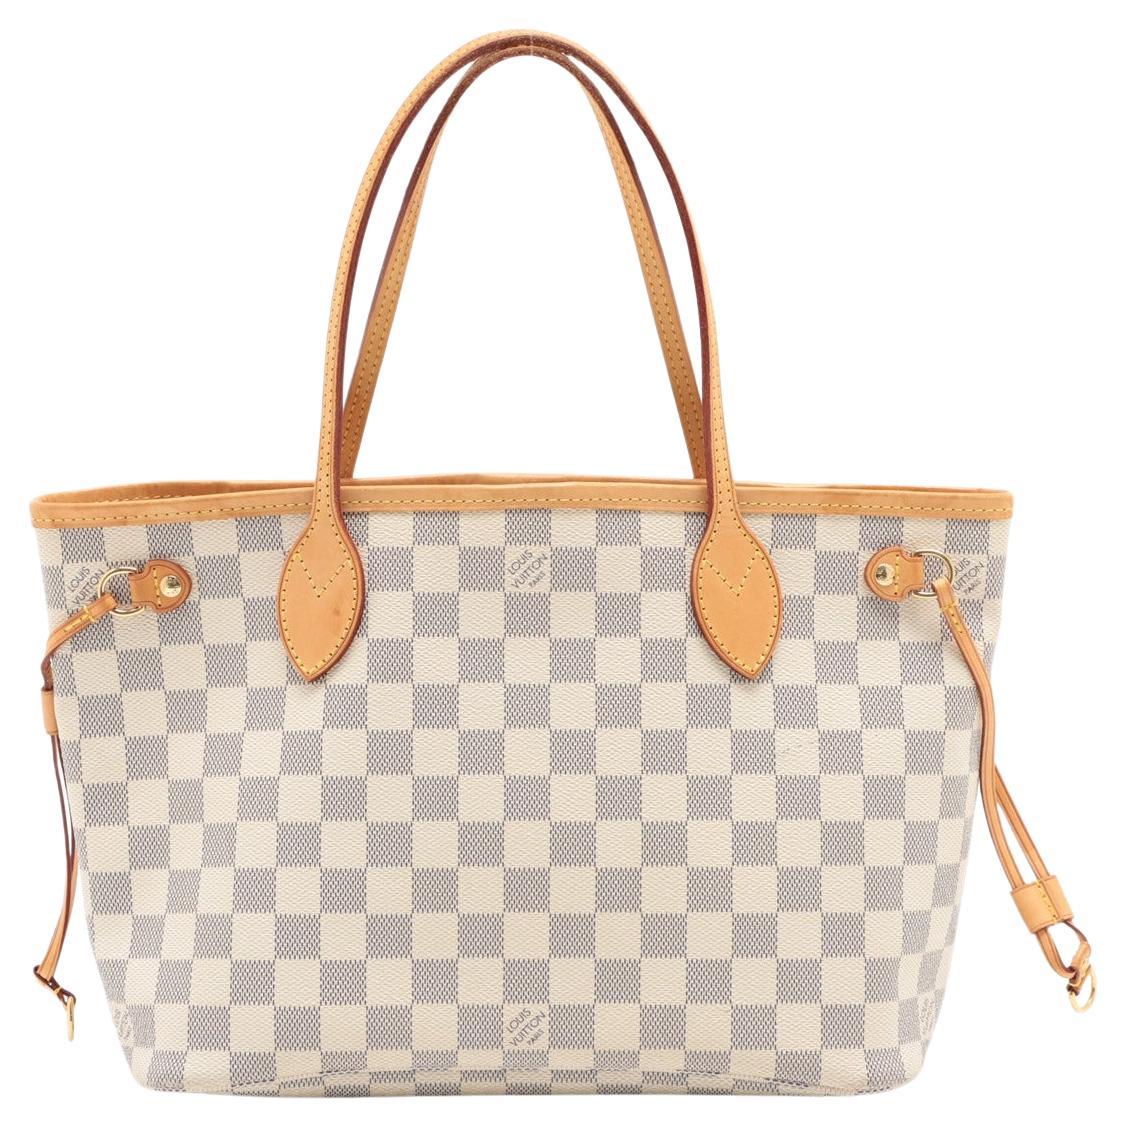 Louis Vuitton Victoire - 3 For Sale on 1stDibs